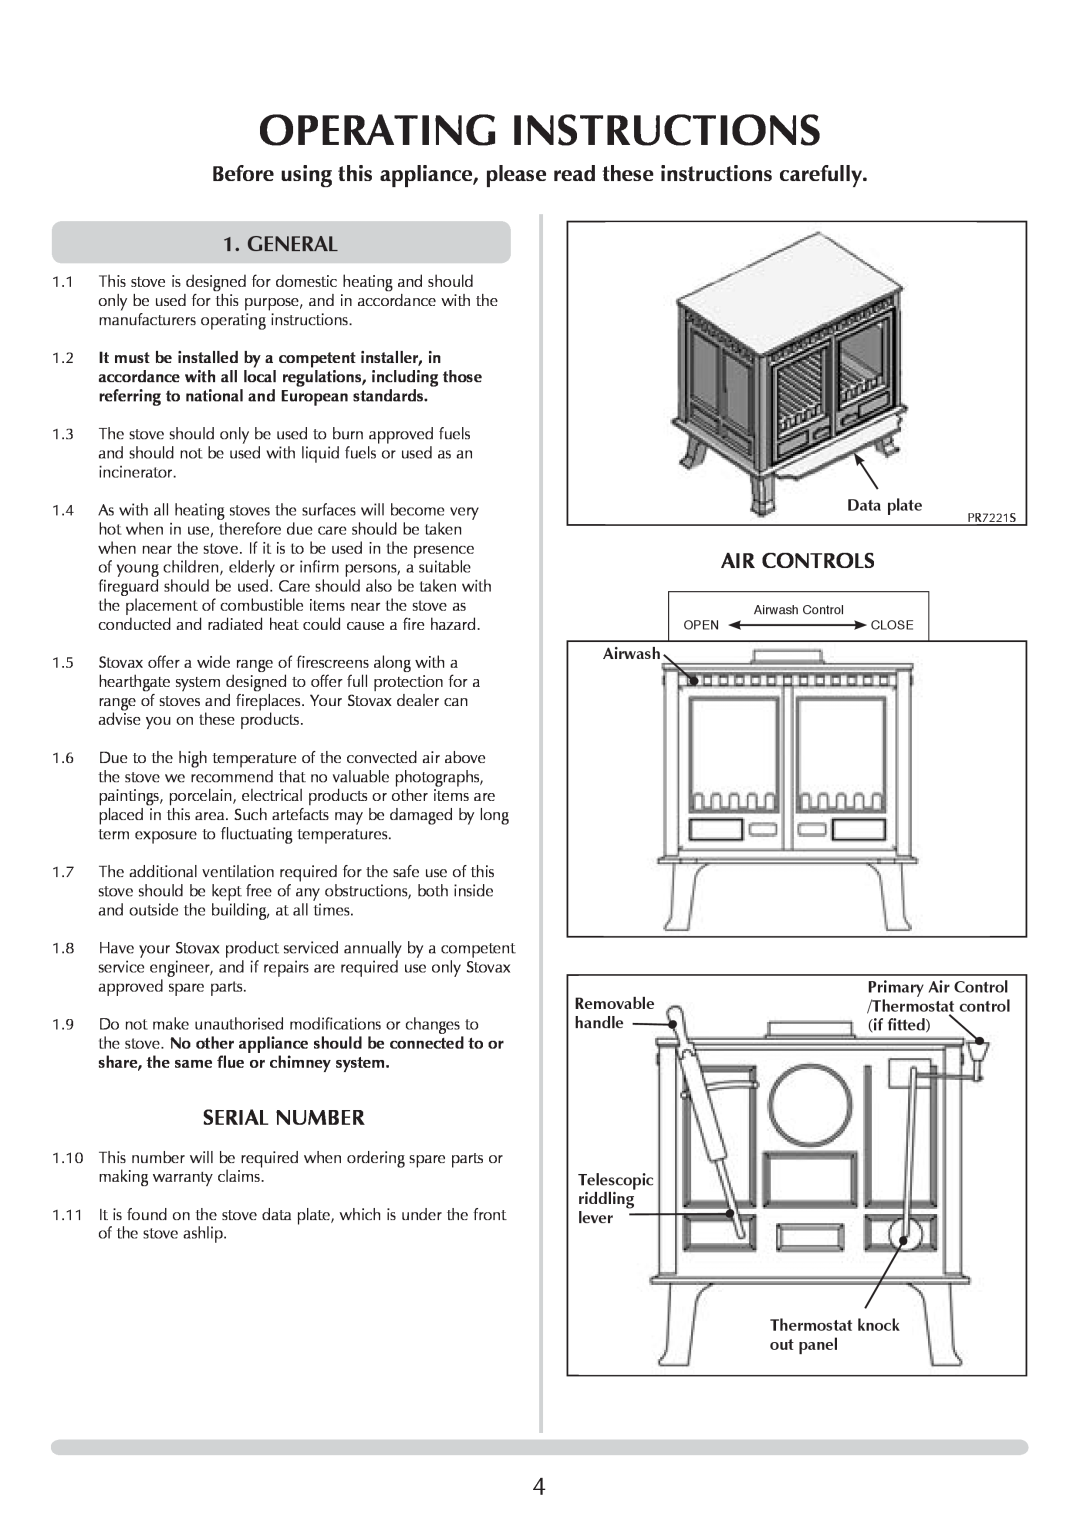 Stovax 7016, 7027, 7017, sheraton free standing stove manual Operating Instructions, General, Air Controls, Serial Number 